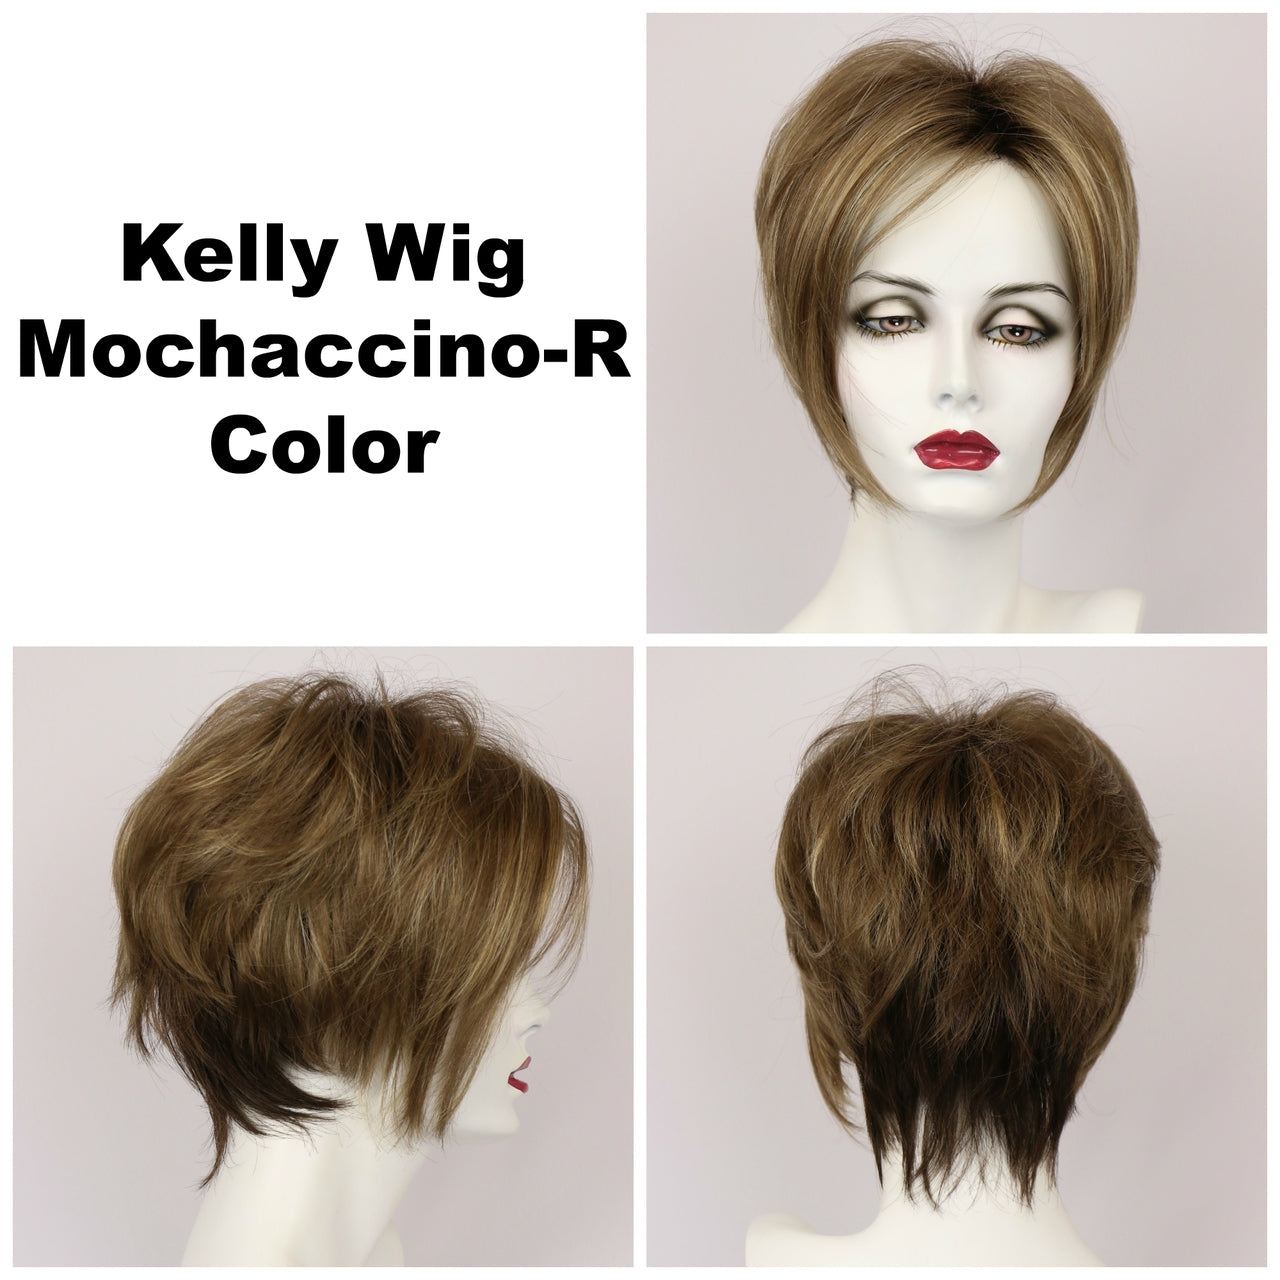 Mochaccino-R / Kelly w/ Roots / Short Wig